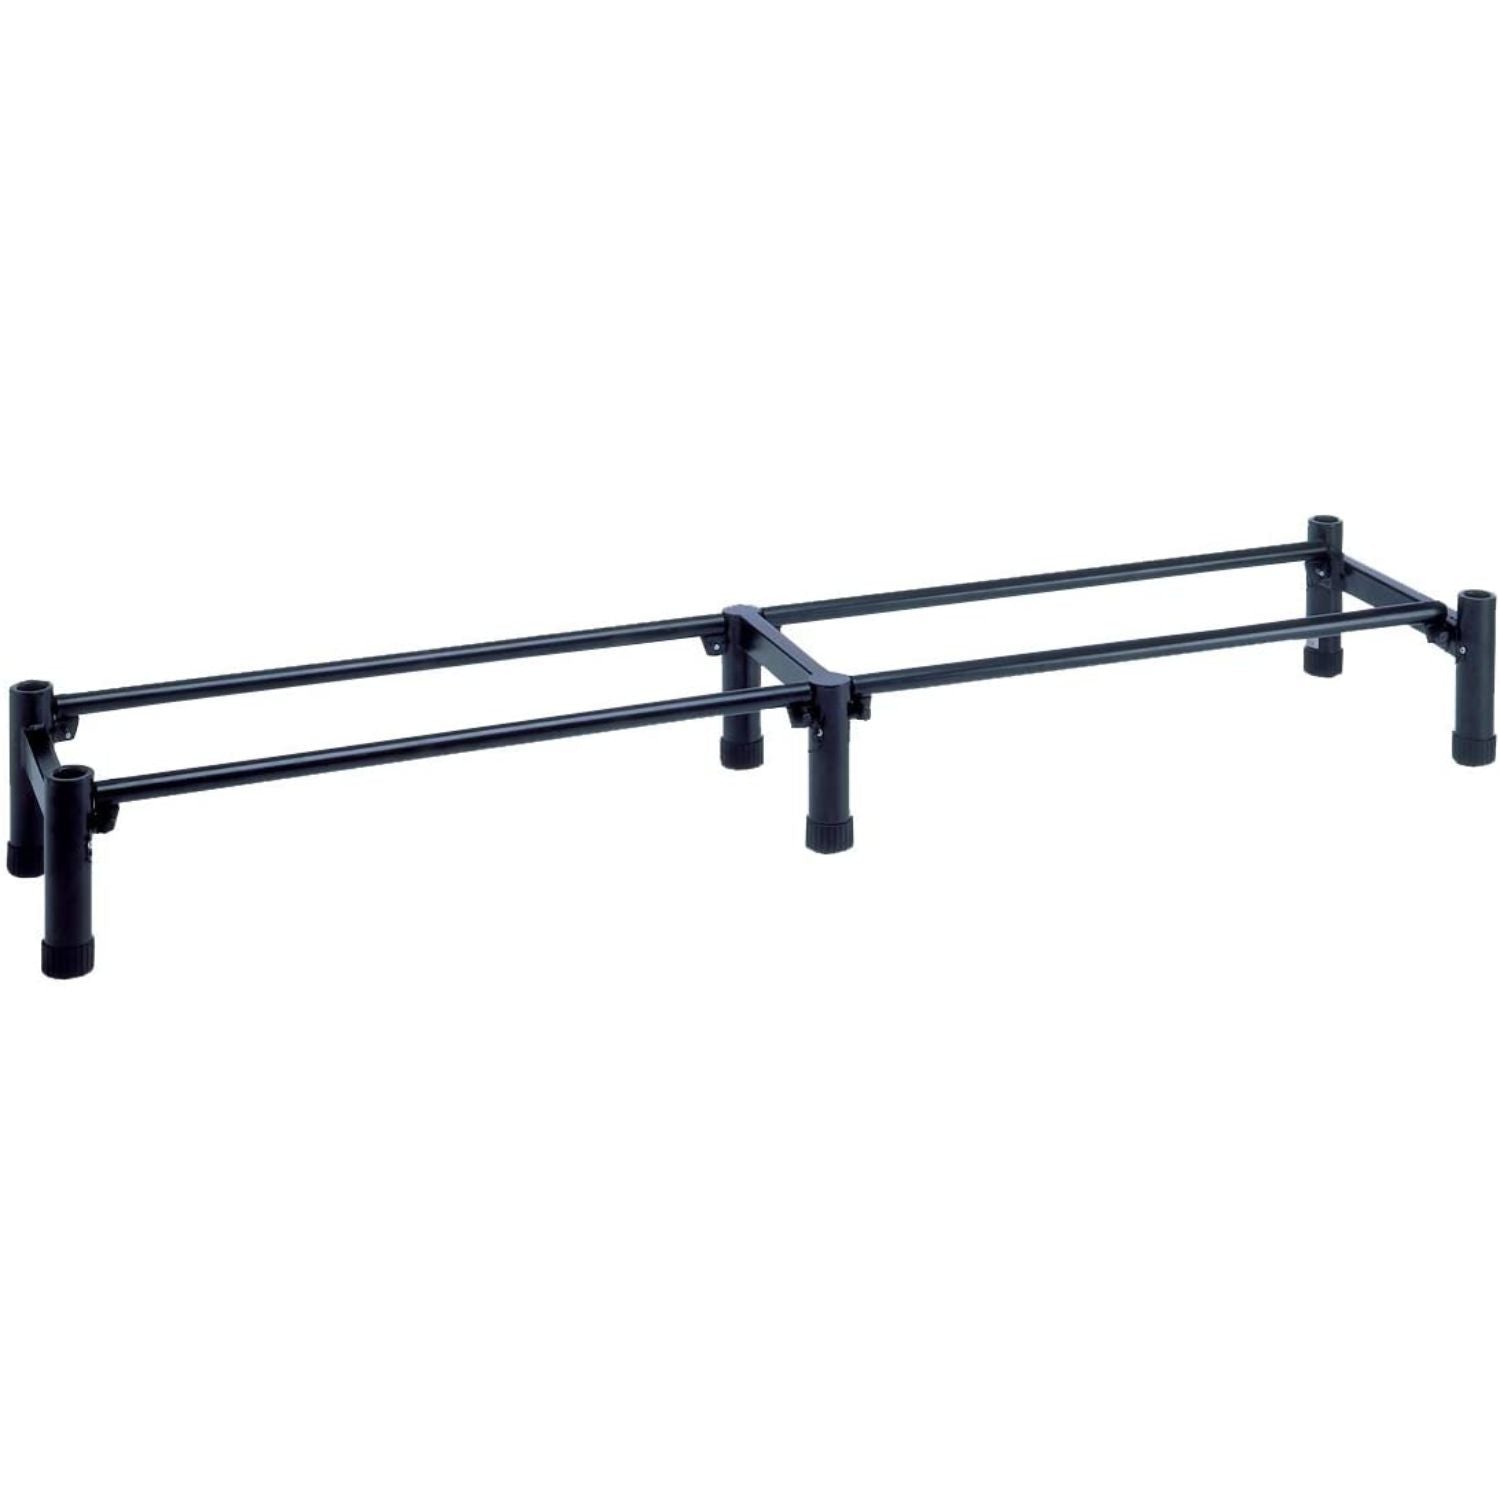 Buy AeroPilates Large Stand for Reformer with Free Shipping